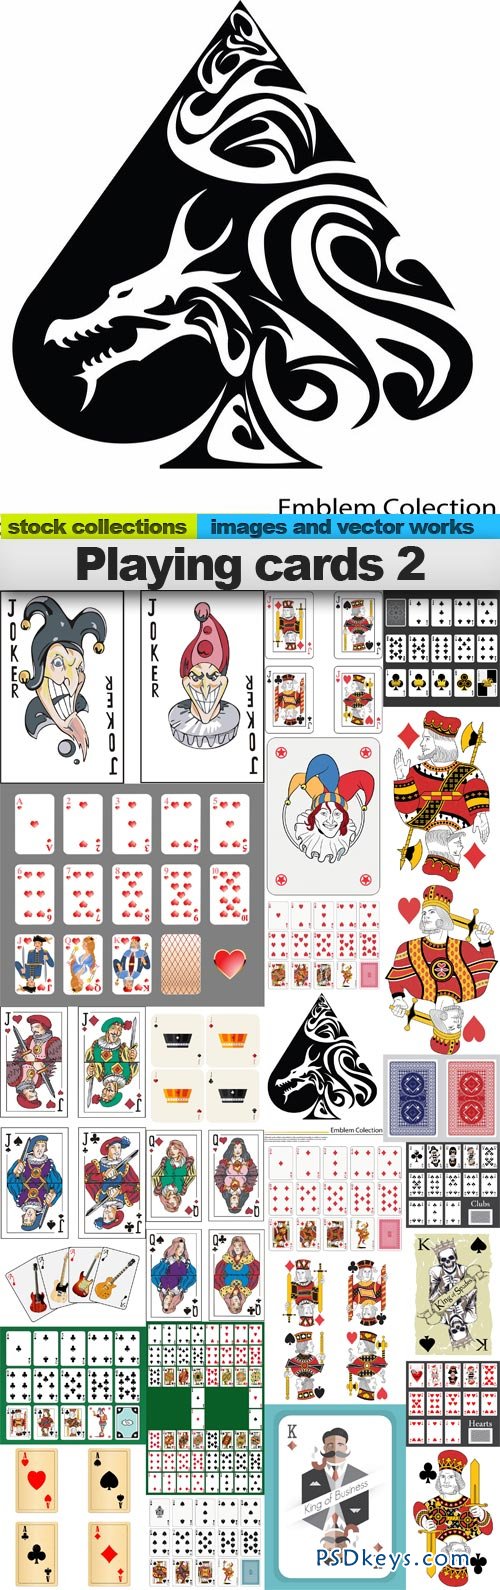 Playing cards 2 25xEPS